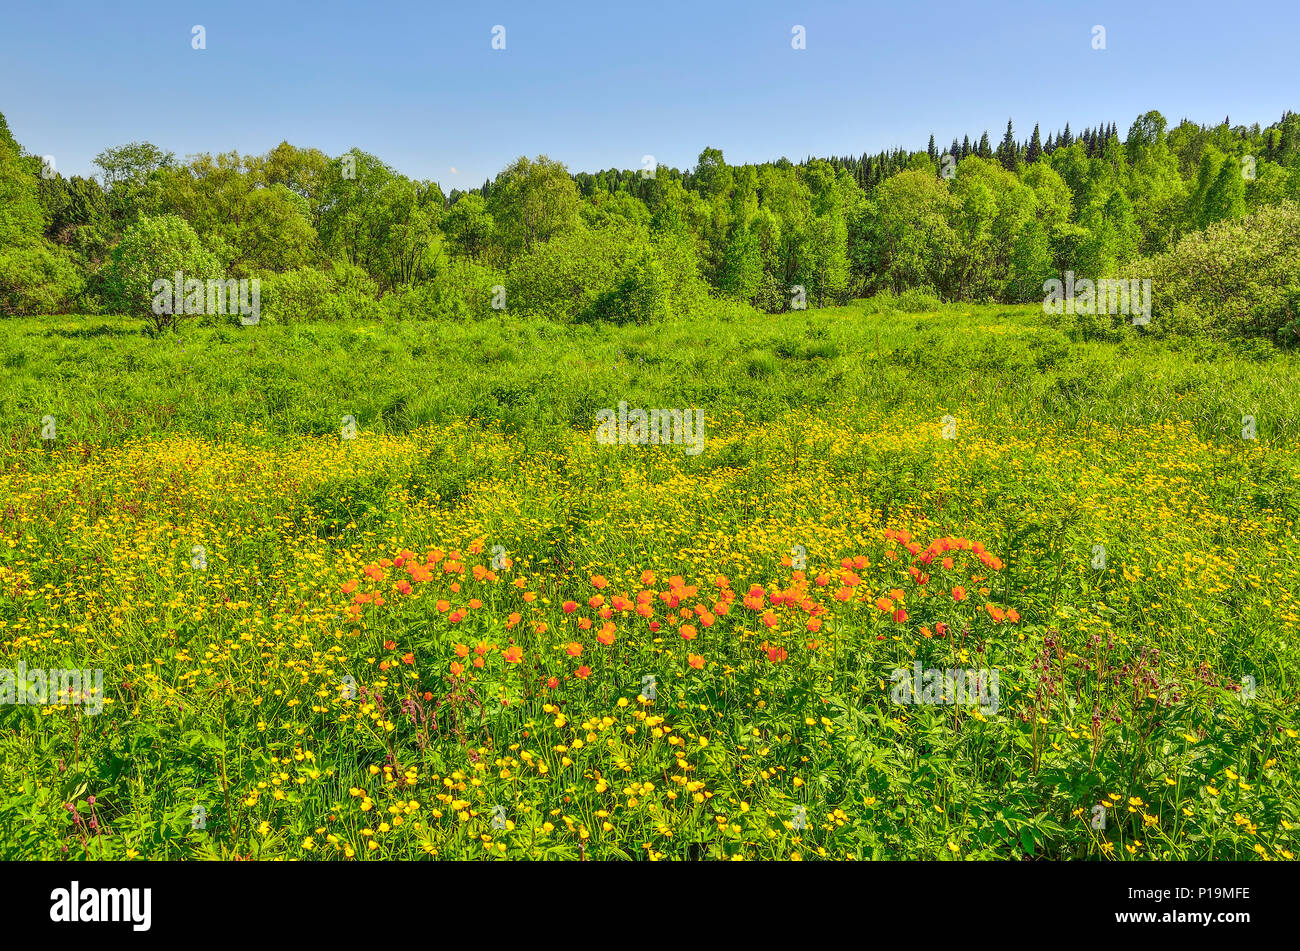 Summer view of rural landscape with blossoming forest glade or meadow. Wild orange flowers Trollius altaicus, Ranunculaceae flowering on spring field  Stock Photo